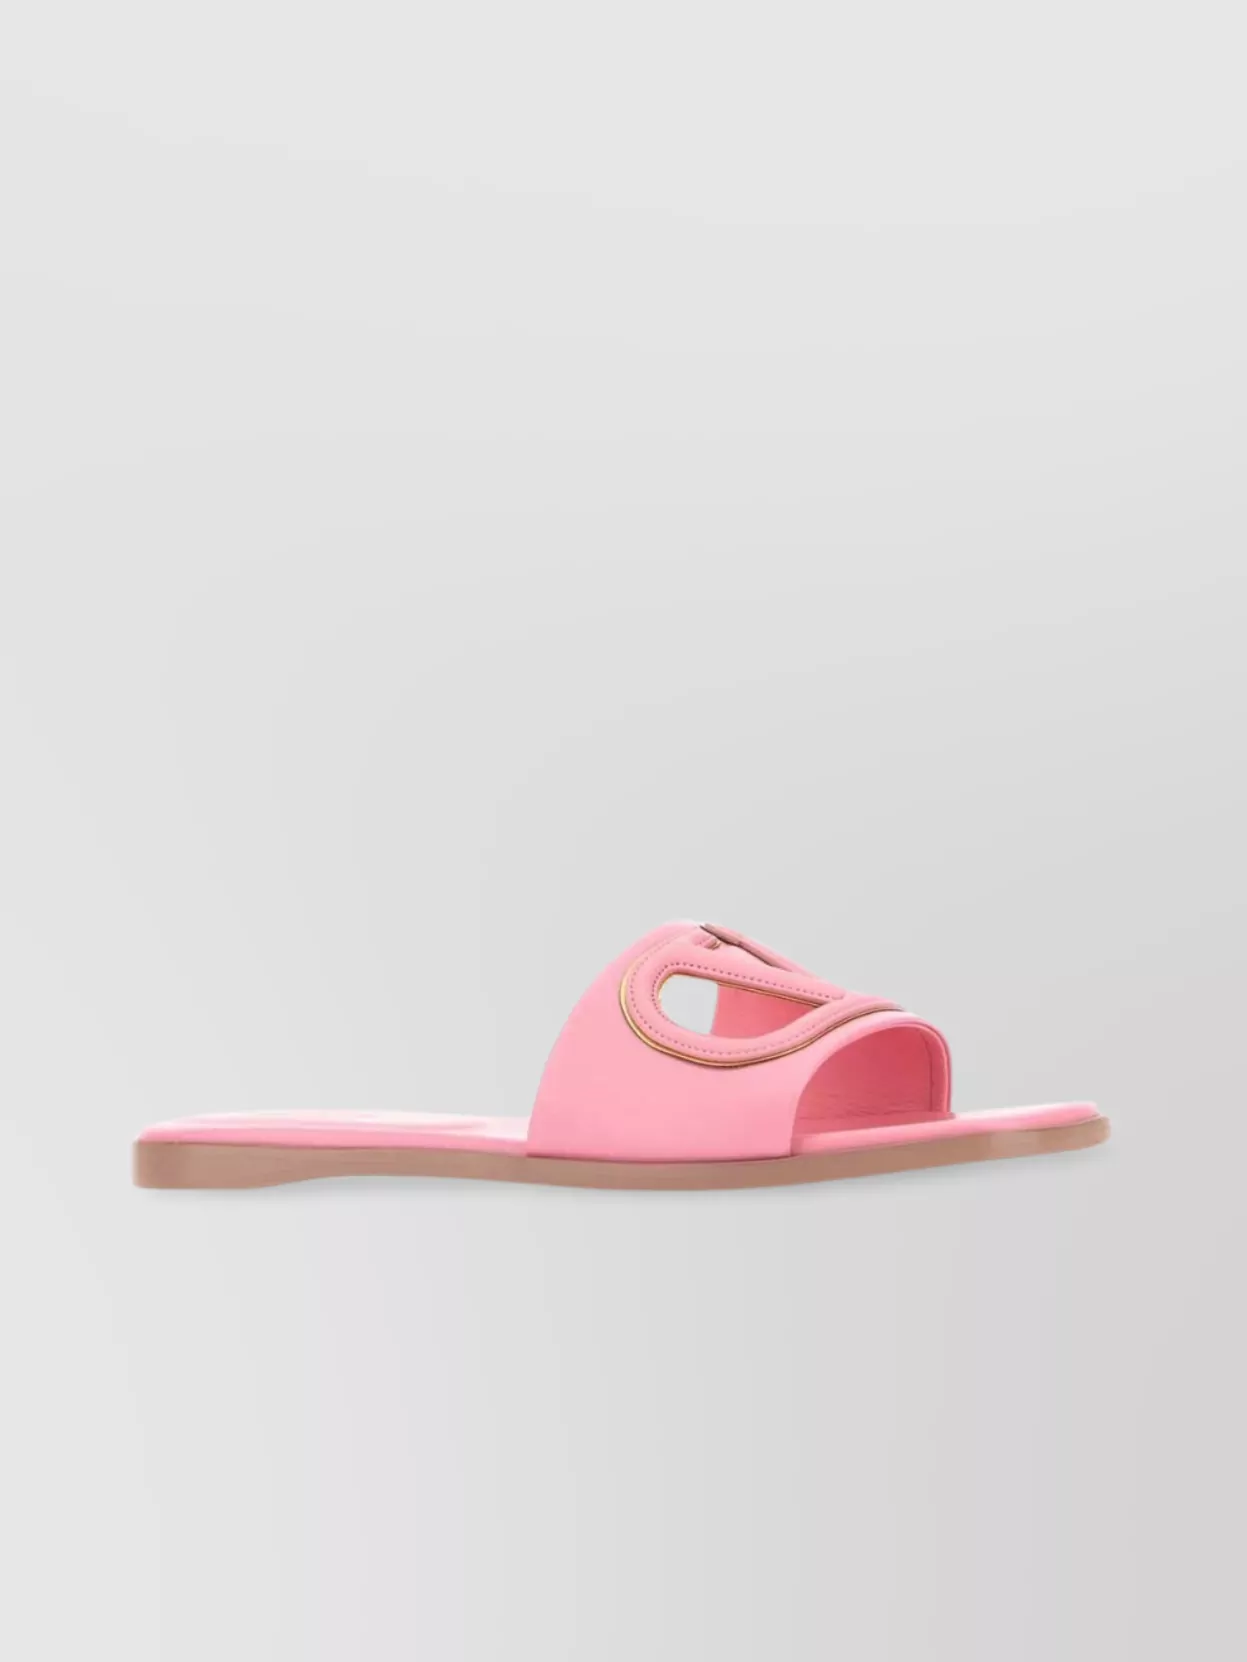 Valentino Garavani Leather Vlogo Slippers With Flat Sole In Pink